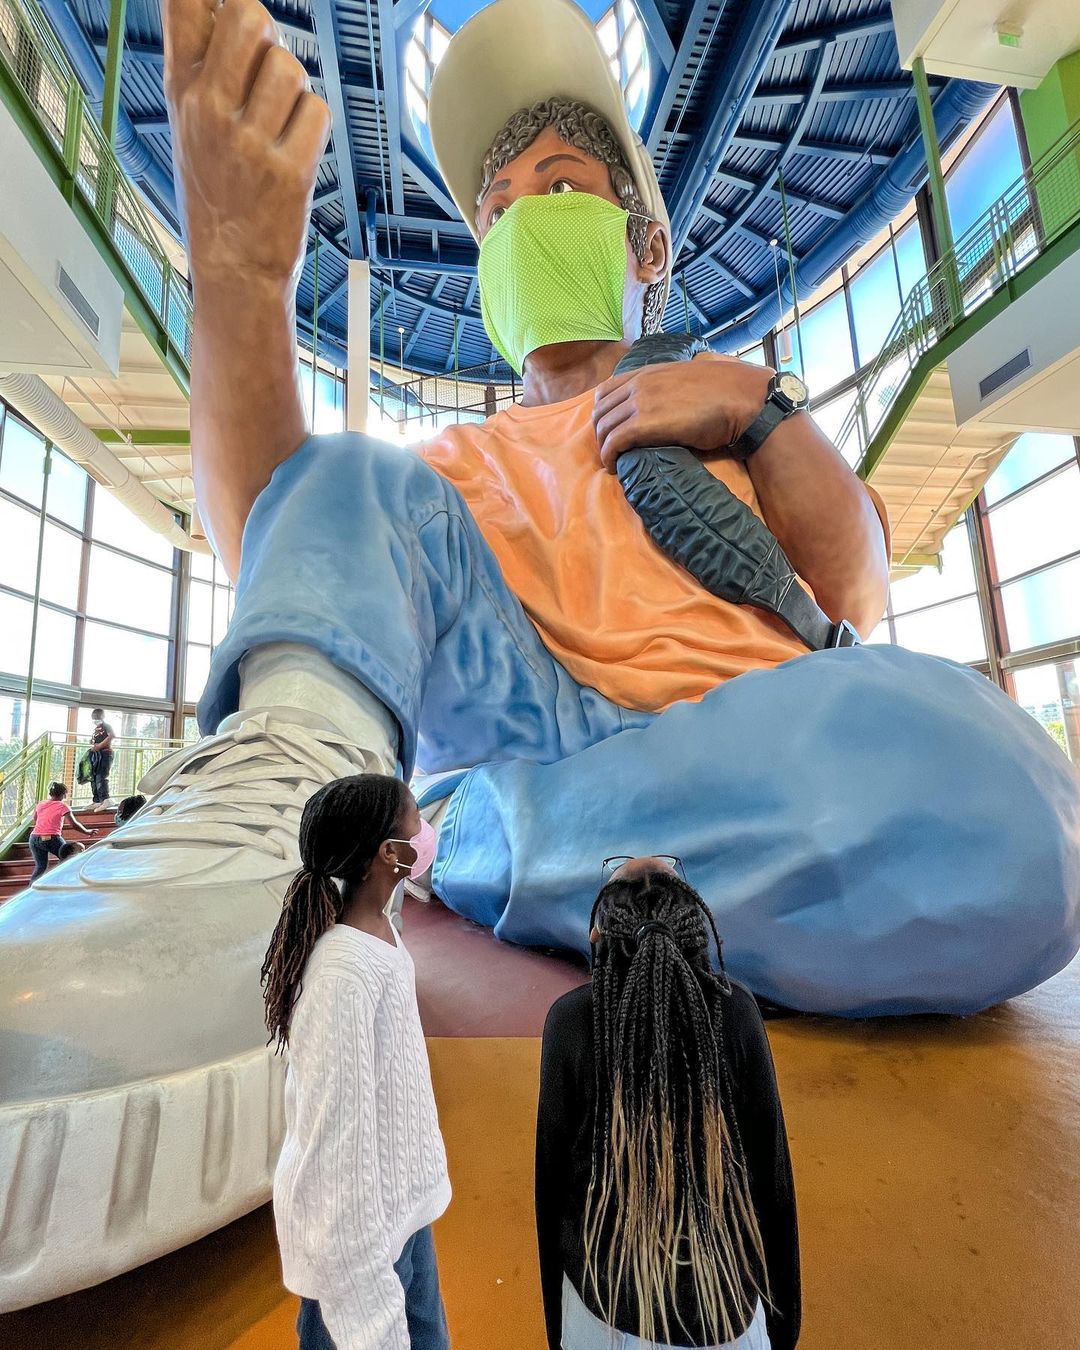 Two children stand in front of the "World's Biggest Kid" statue at EdVenture Children's Museum in Columbia, SC. Image by Instagram user @thespringbreakfamily.